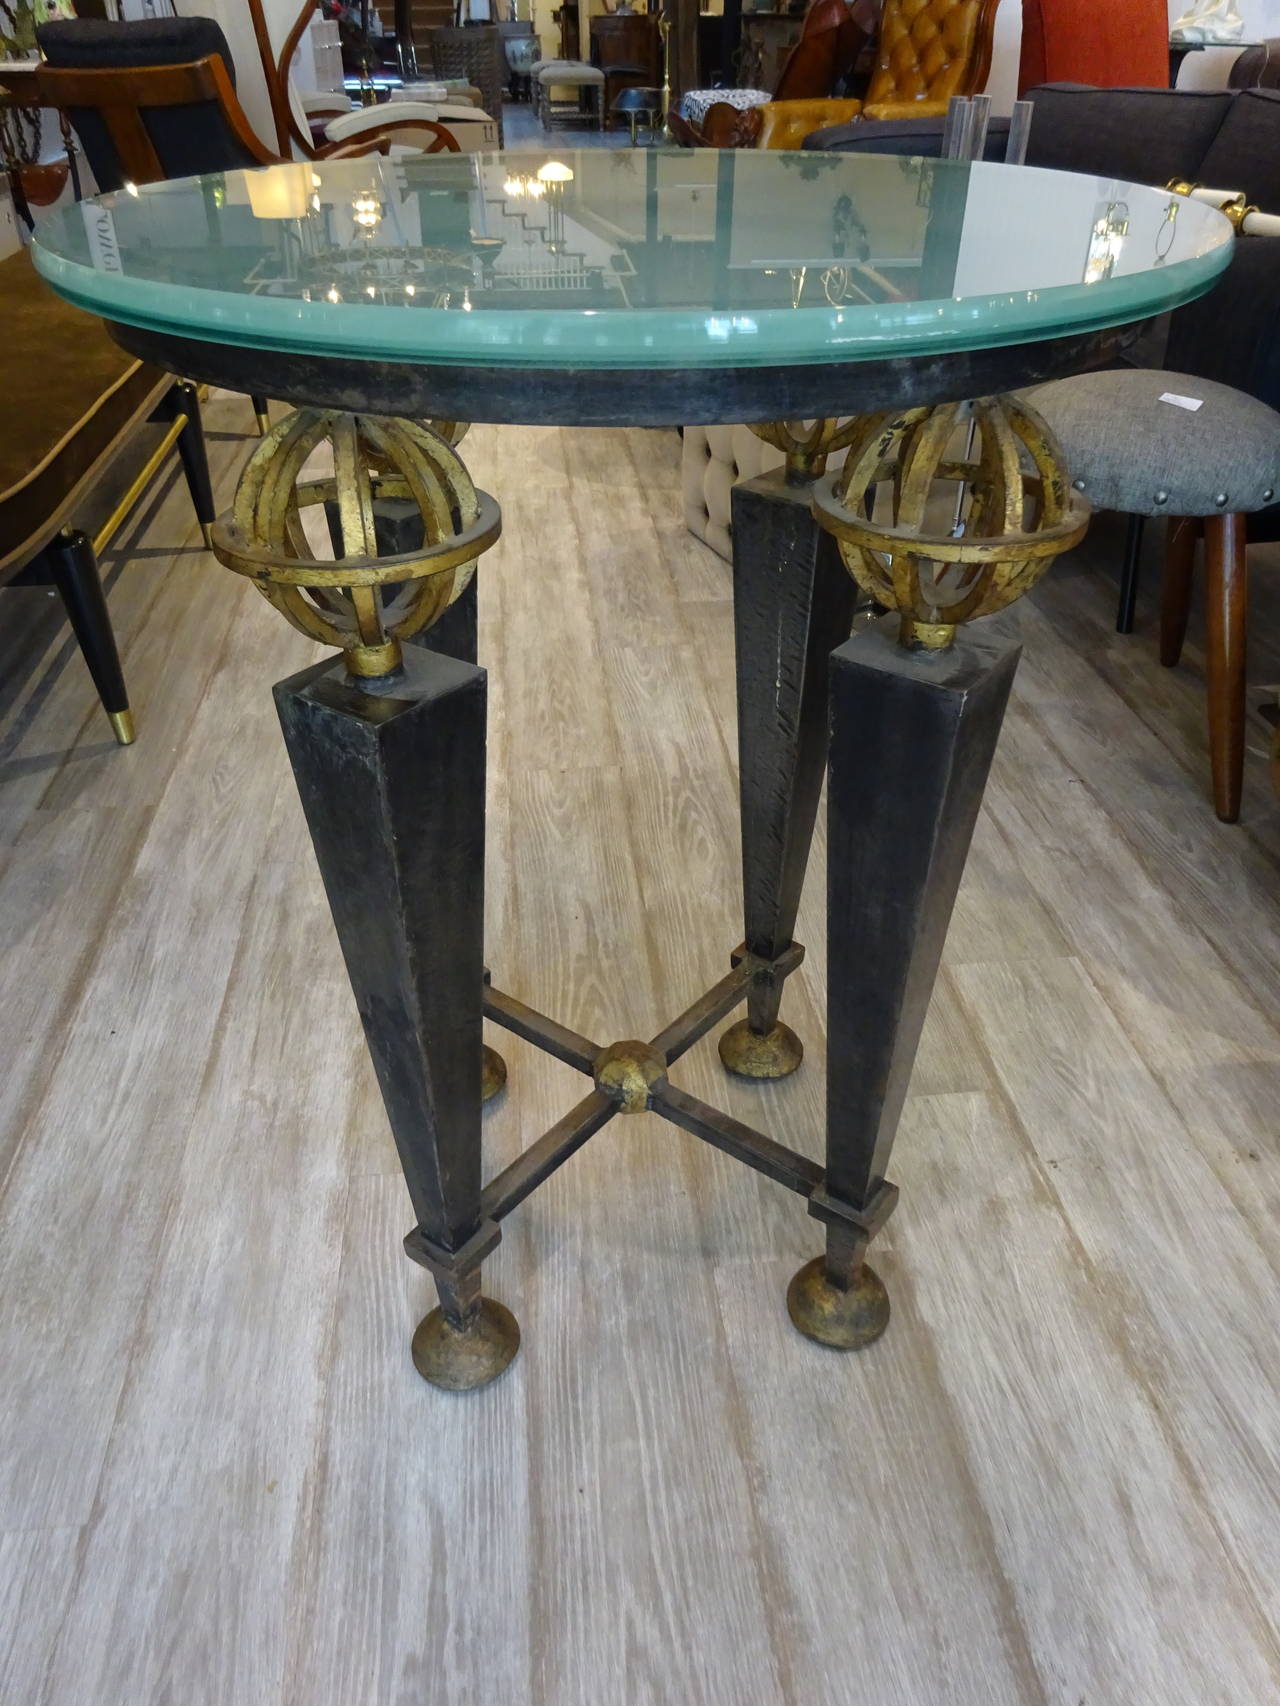 French Neoclassical Gilt Iron Gueridon

Experience the allure of French craftsmanship with our Neoclassical Gilt Iron Gueridon. It features a sturdy yet attractive thick opaque glass top cradled atop four finely gilt wrought iron globes. Elegantly